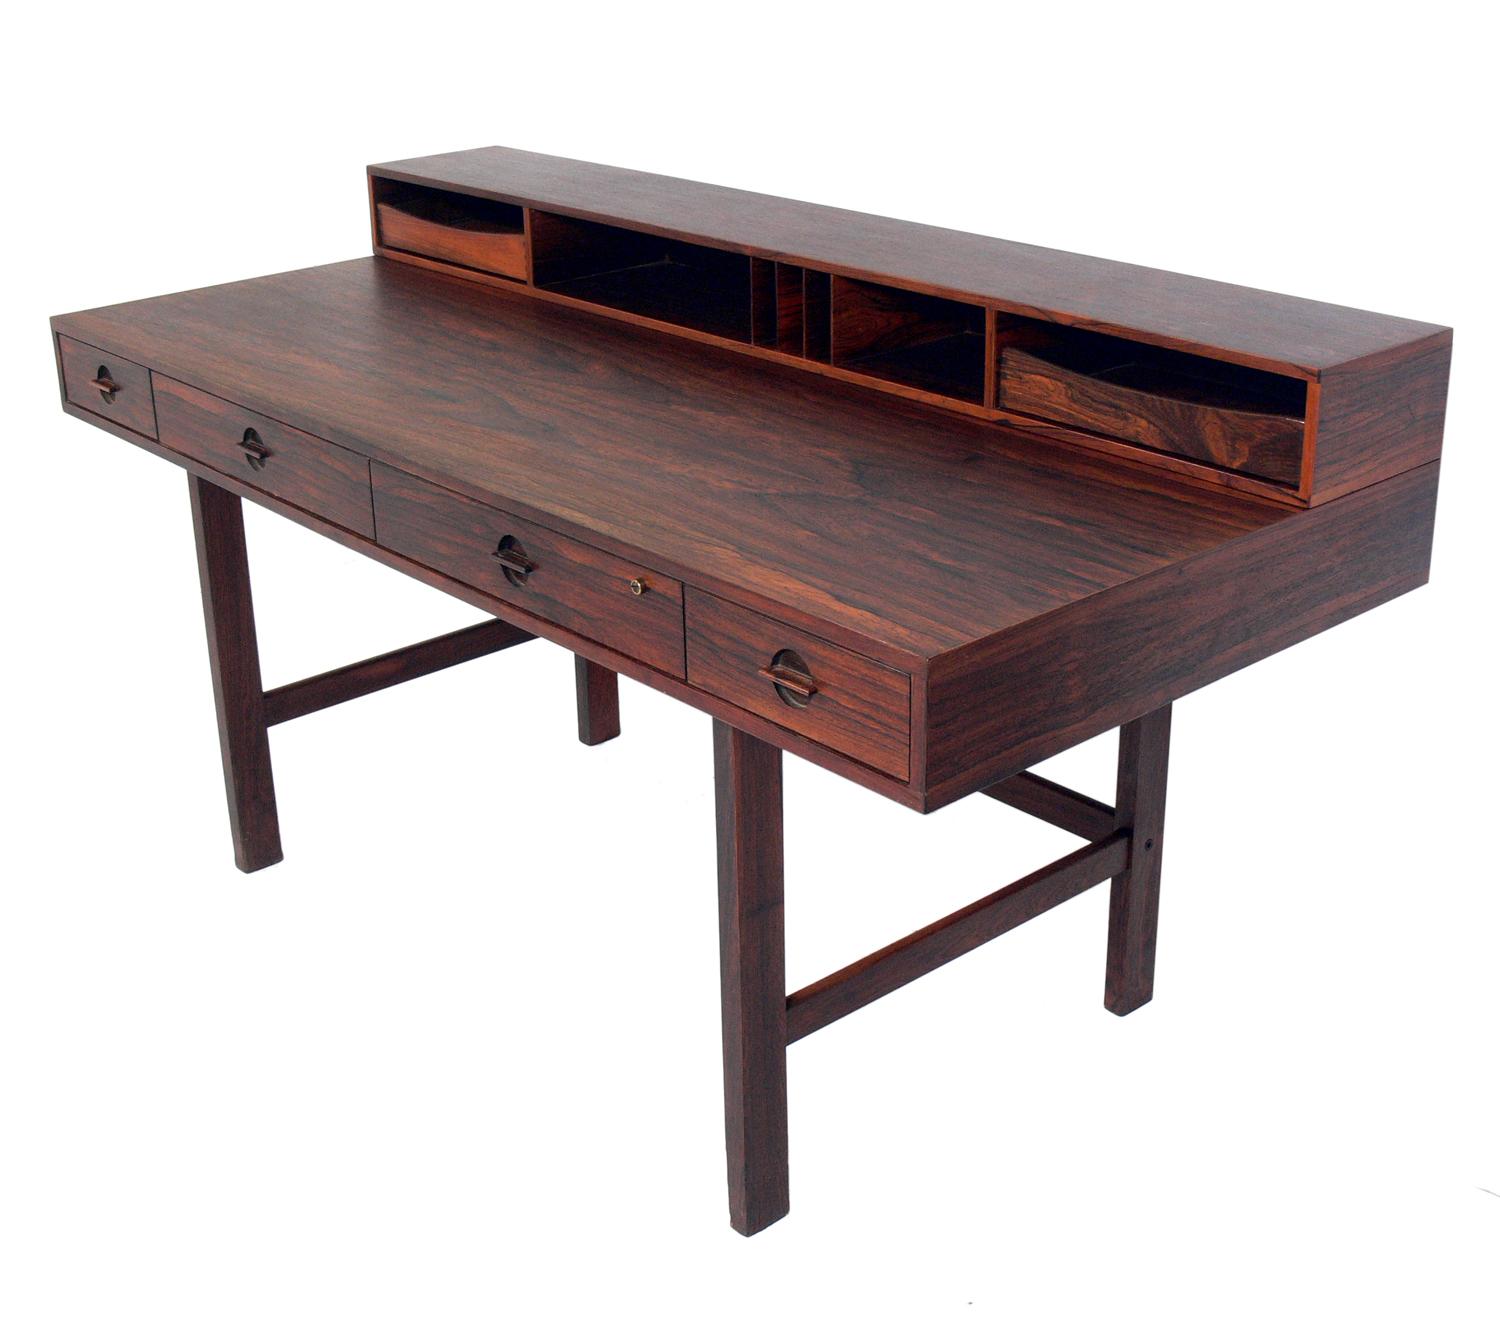 Clean lined architectural desk, designed by Jens Quistgaard for Lovig Dansk, Denmark, circa 1960s. It is an ingenious design as the top portion can be used as storage, or can be flipped down to be used as a partners desk. The desk measures 28.75